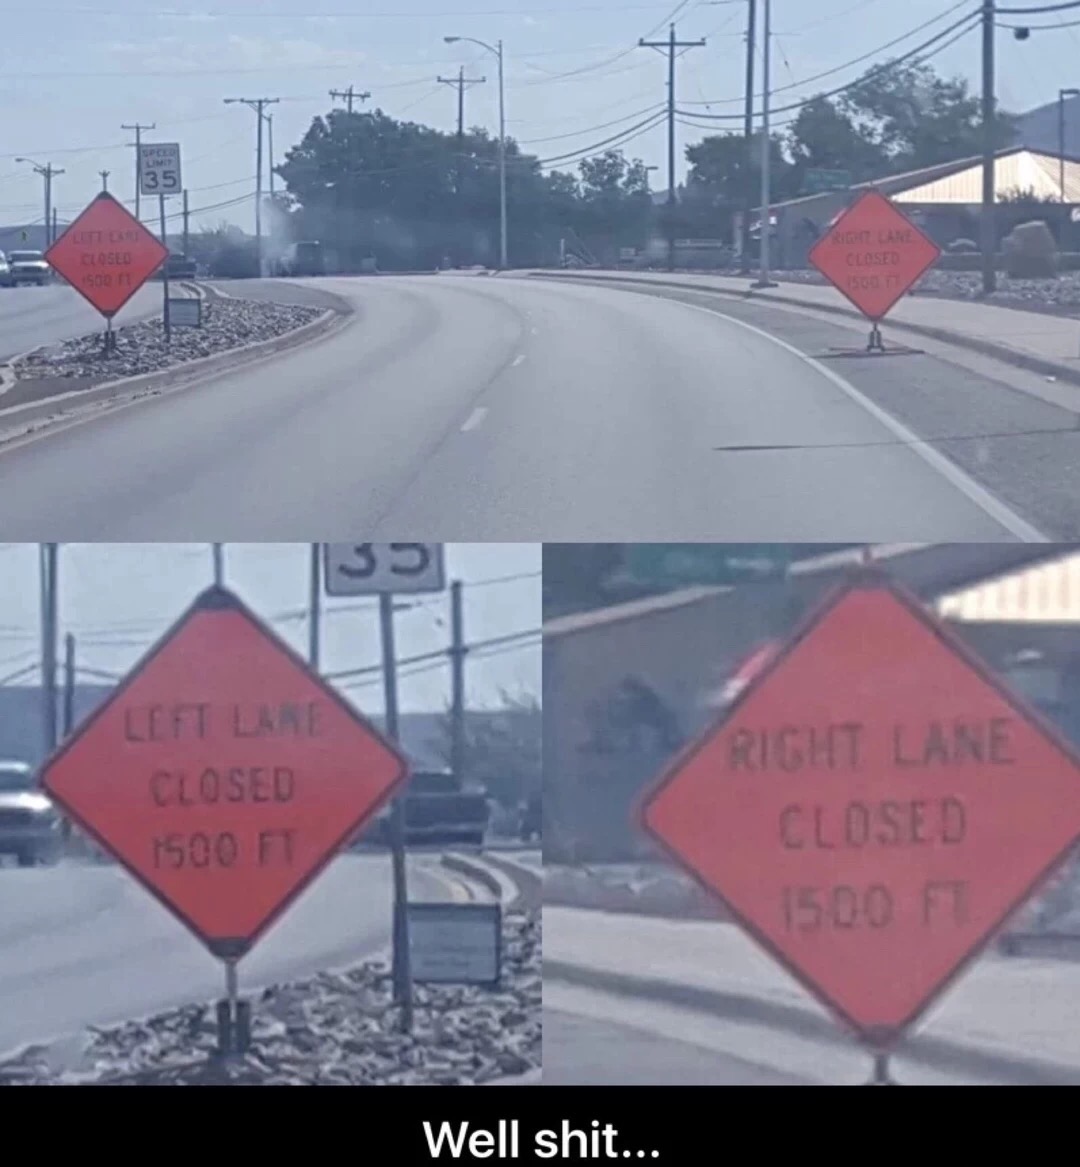 meme stream - snow - 35 Closed Left Lare Closed 1500 Ft Right Lane Closed 1500 Ft Well shit...